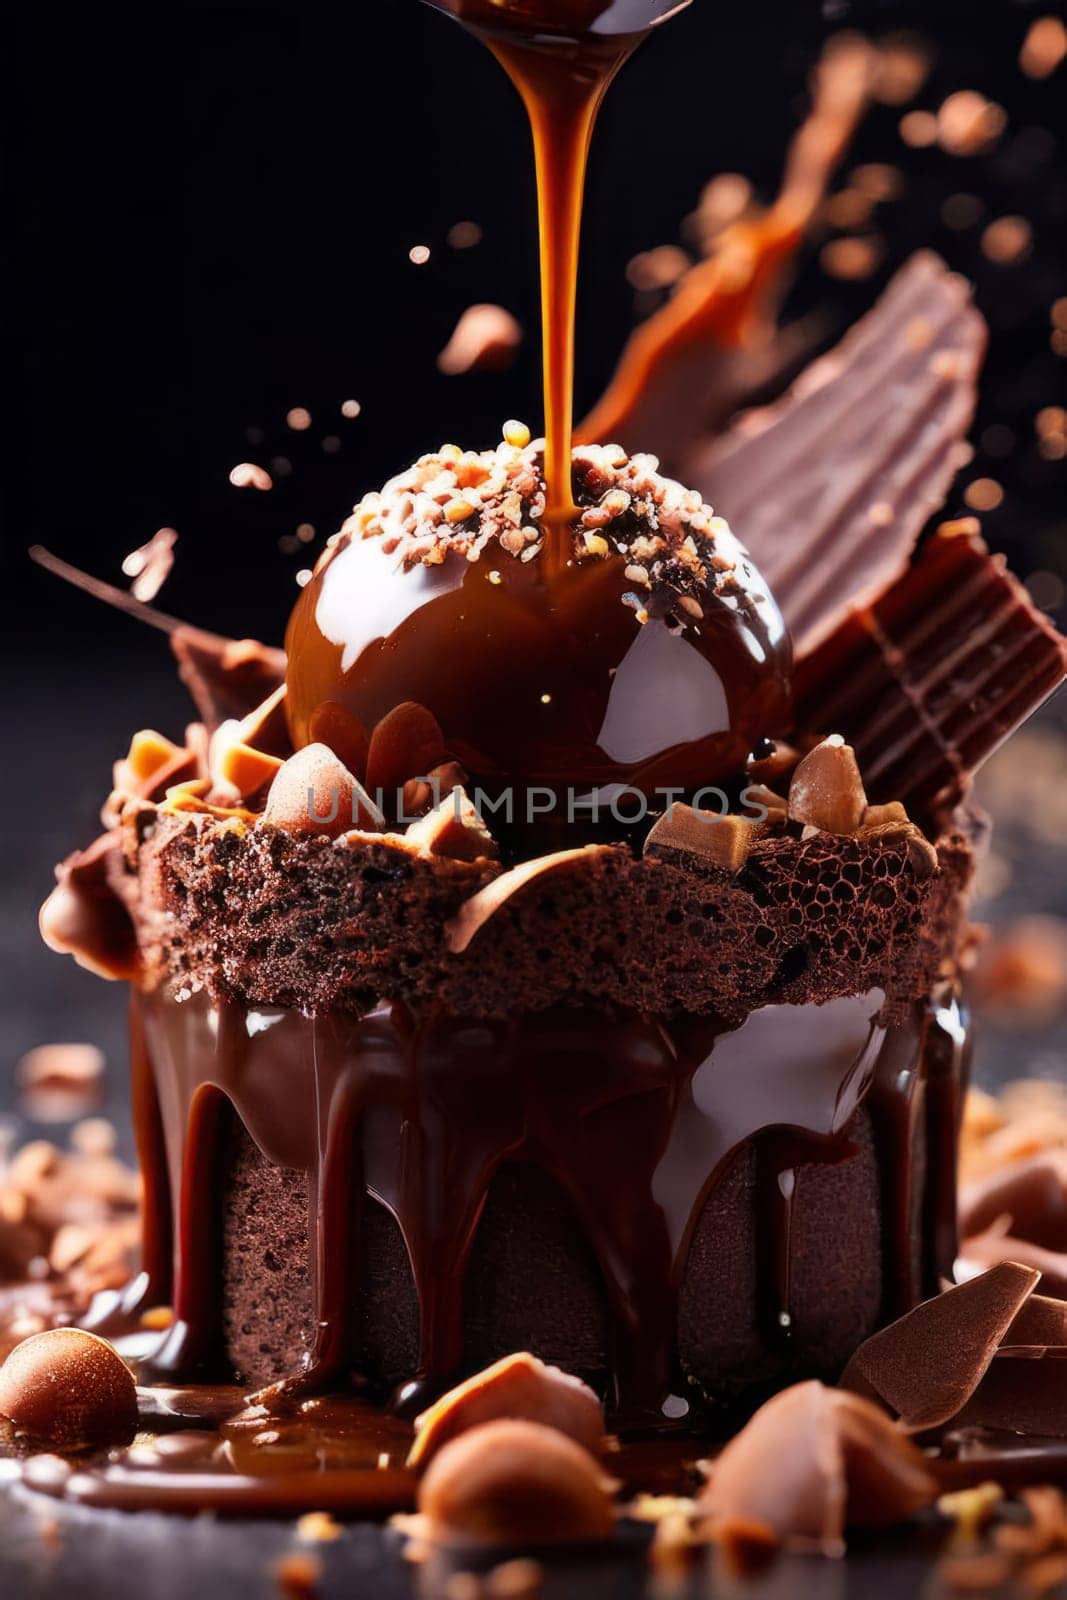 Decadent piece of chocolate cake being generously drizzled with rich, velvety chocolate sauce, creating mouthwatering, indulgent dessert. For advertising chocolate products, desserts in general. by Angelsmoon